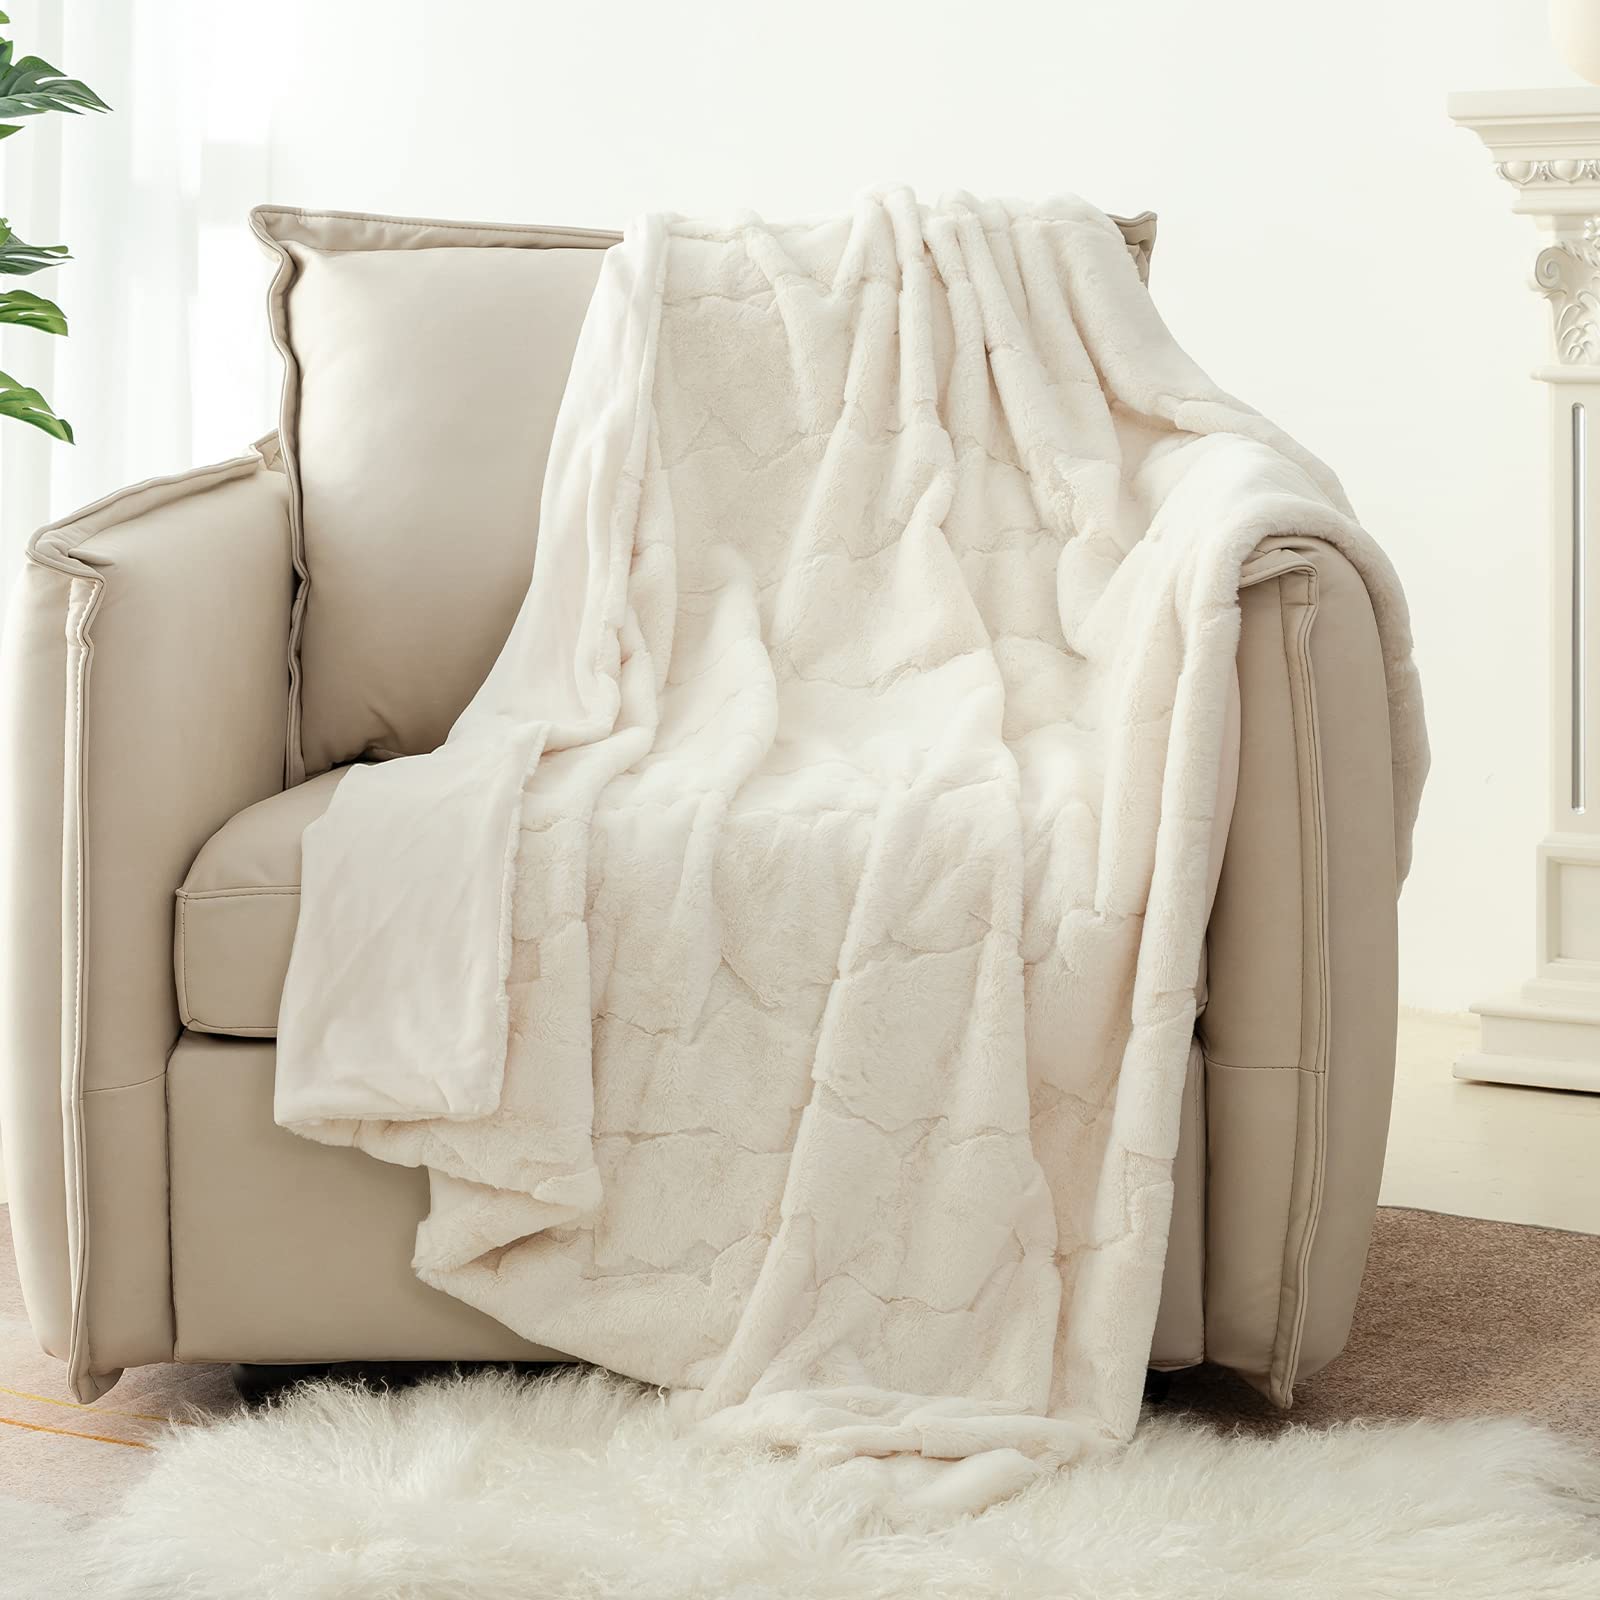 Snuggle Sac Faux Fur Blanket Marble Throw Blanket for Couch Fluffy Soft and Luxury, 50" x 60" (A-White)